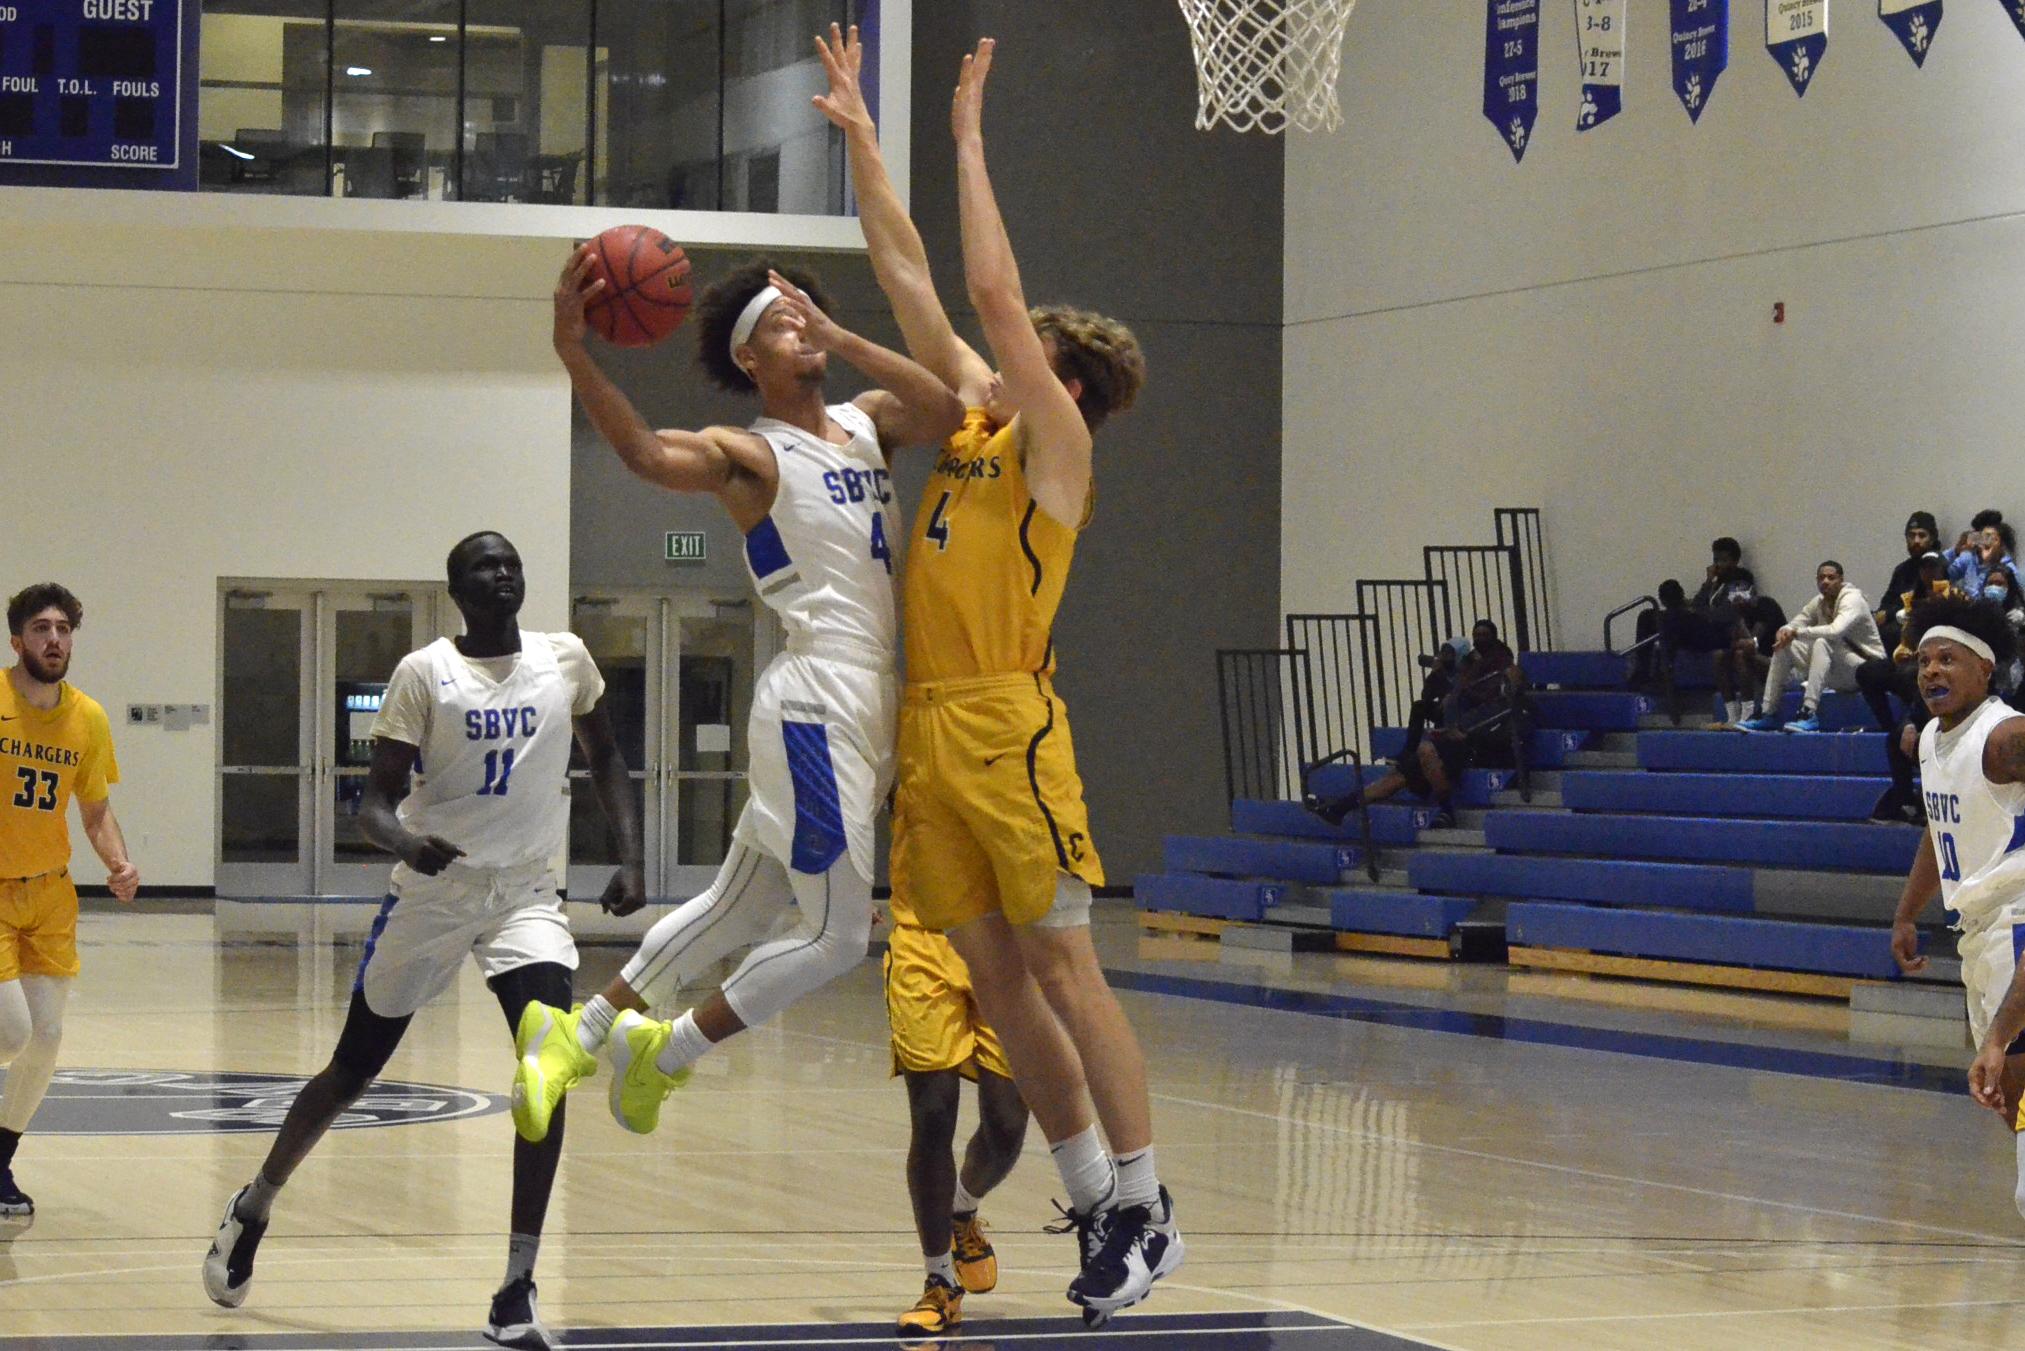 SBVC Moves On With Gritty Win